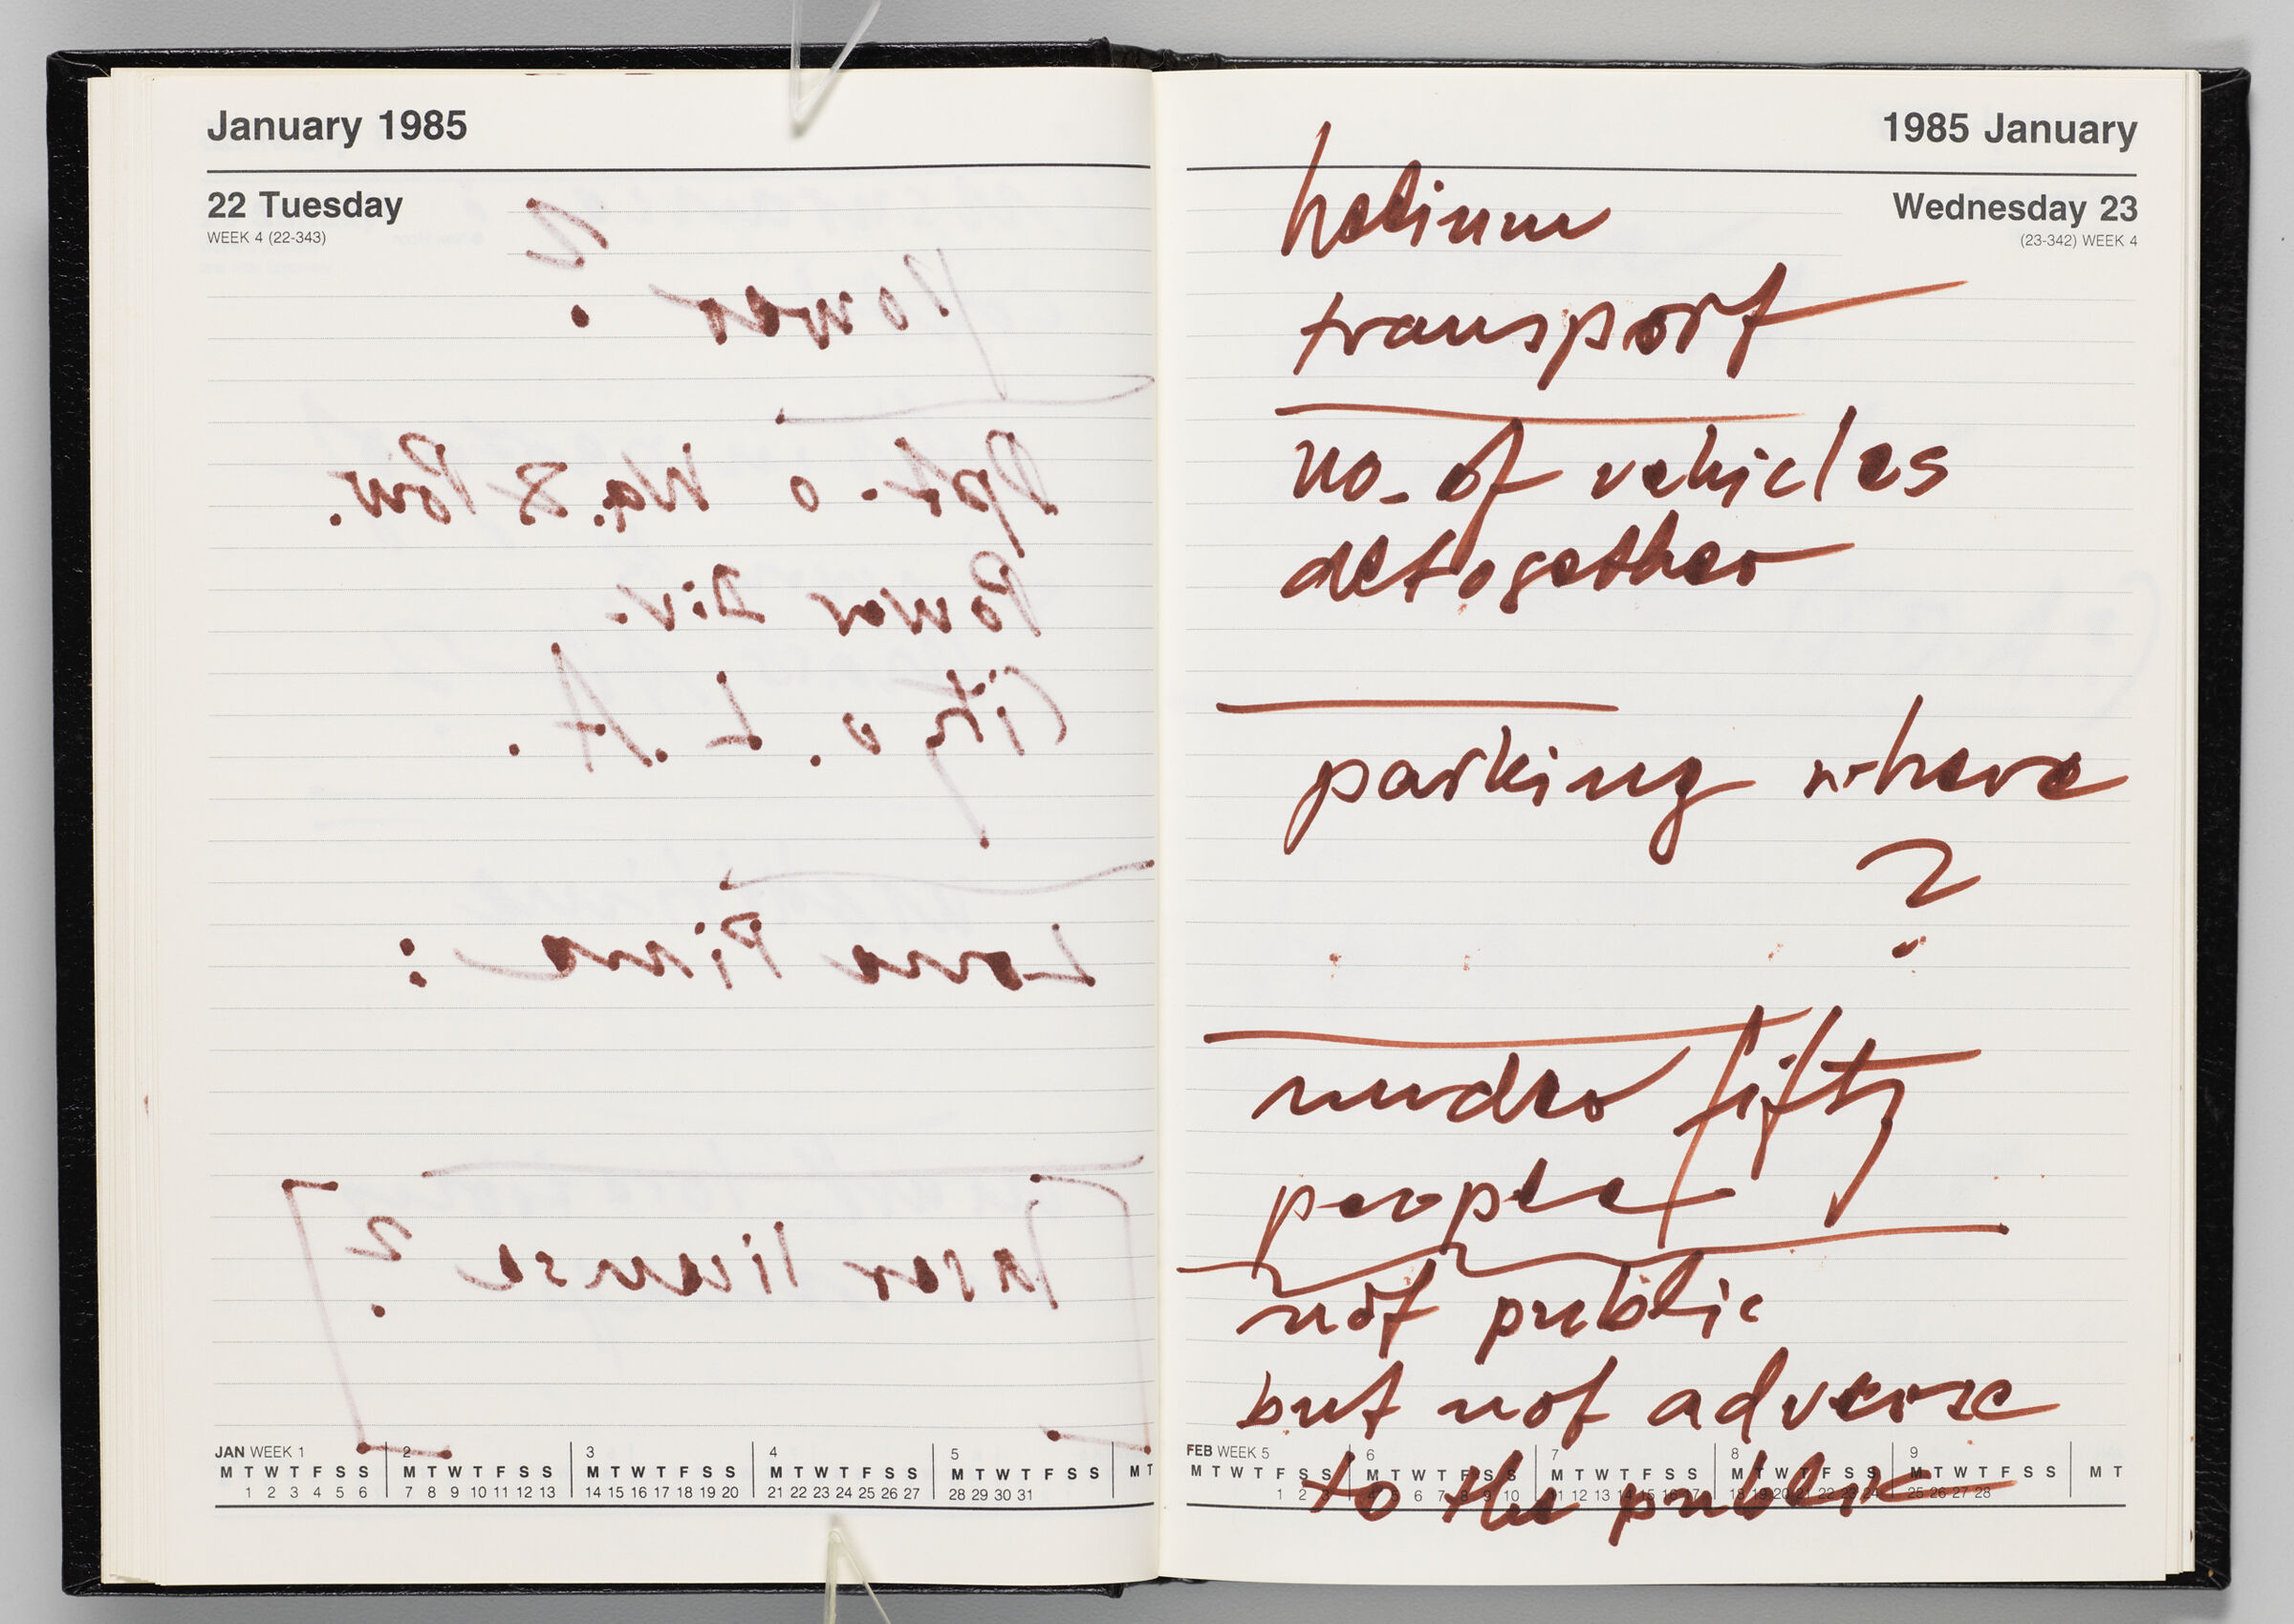 Untitled (Bleed-Through Of Previous Page, Left Page); Untitled (Notes On Calendar Page January 23, 1985, Right Page)